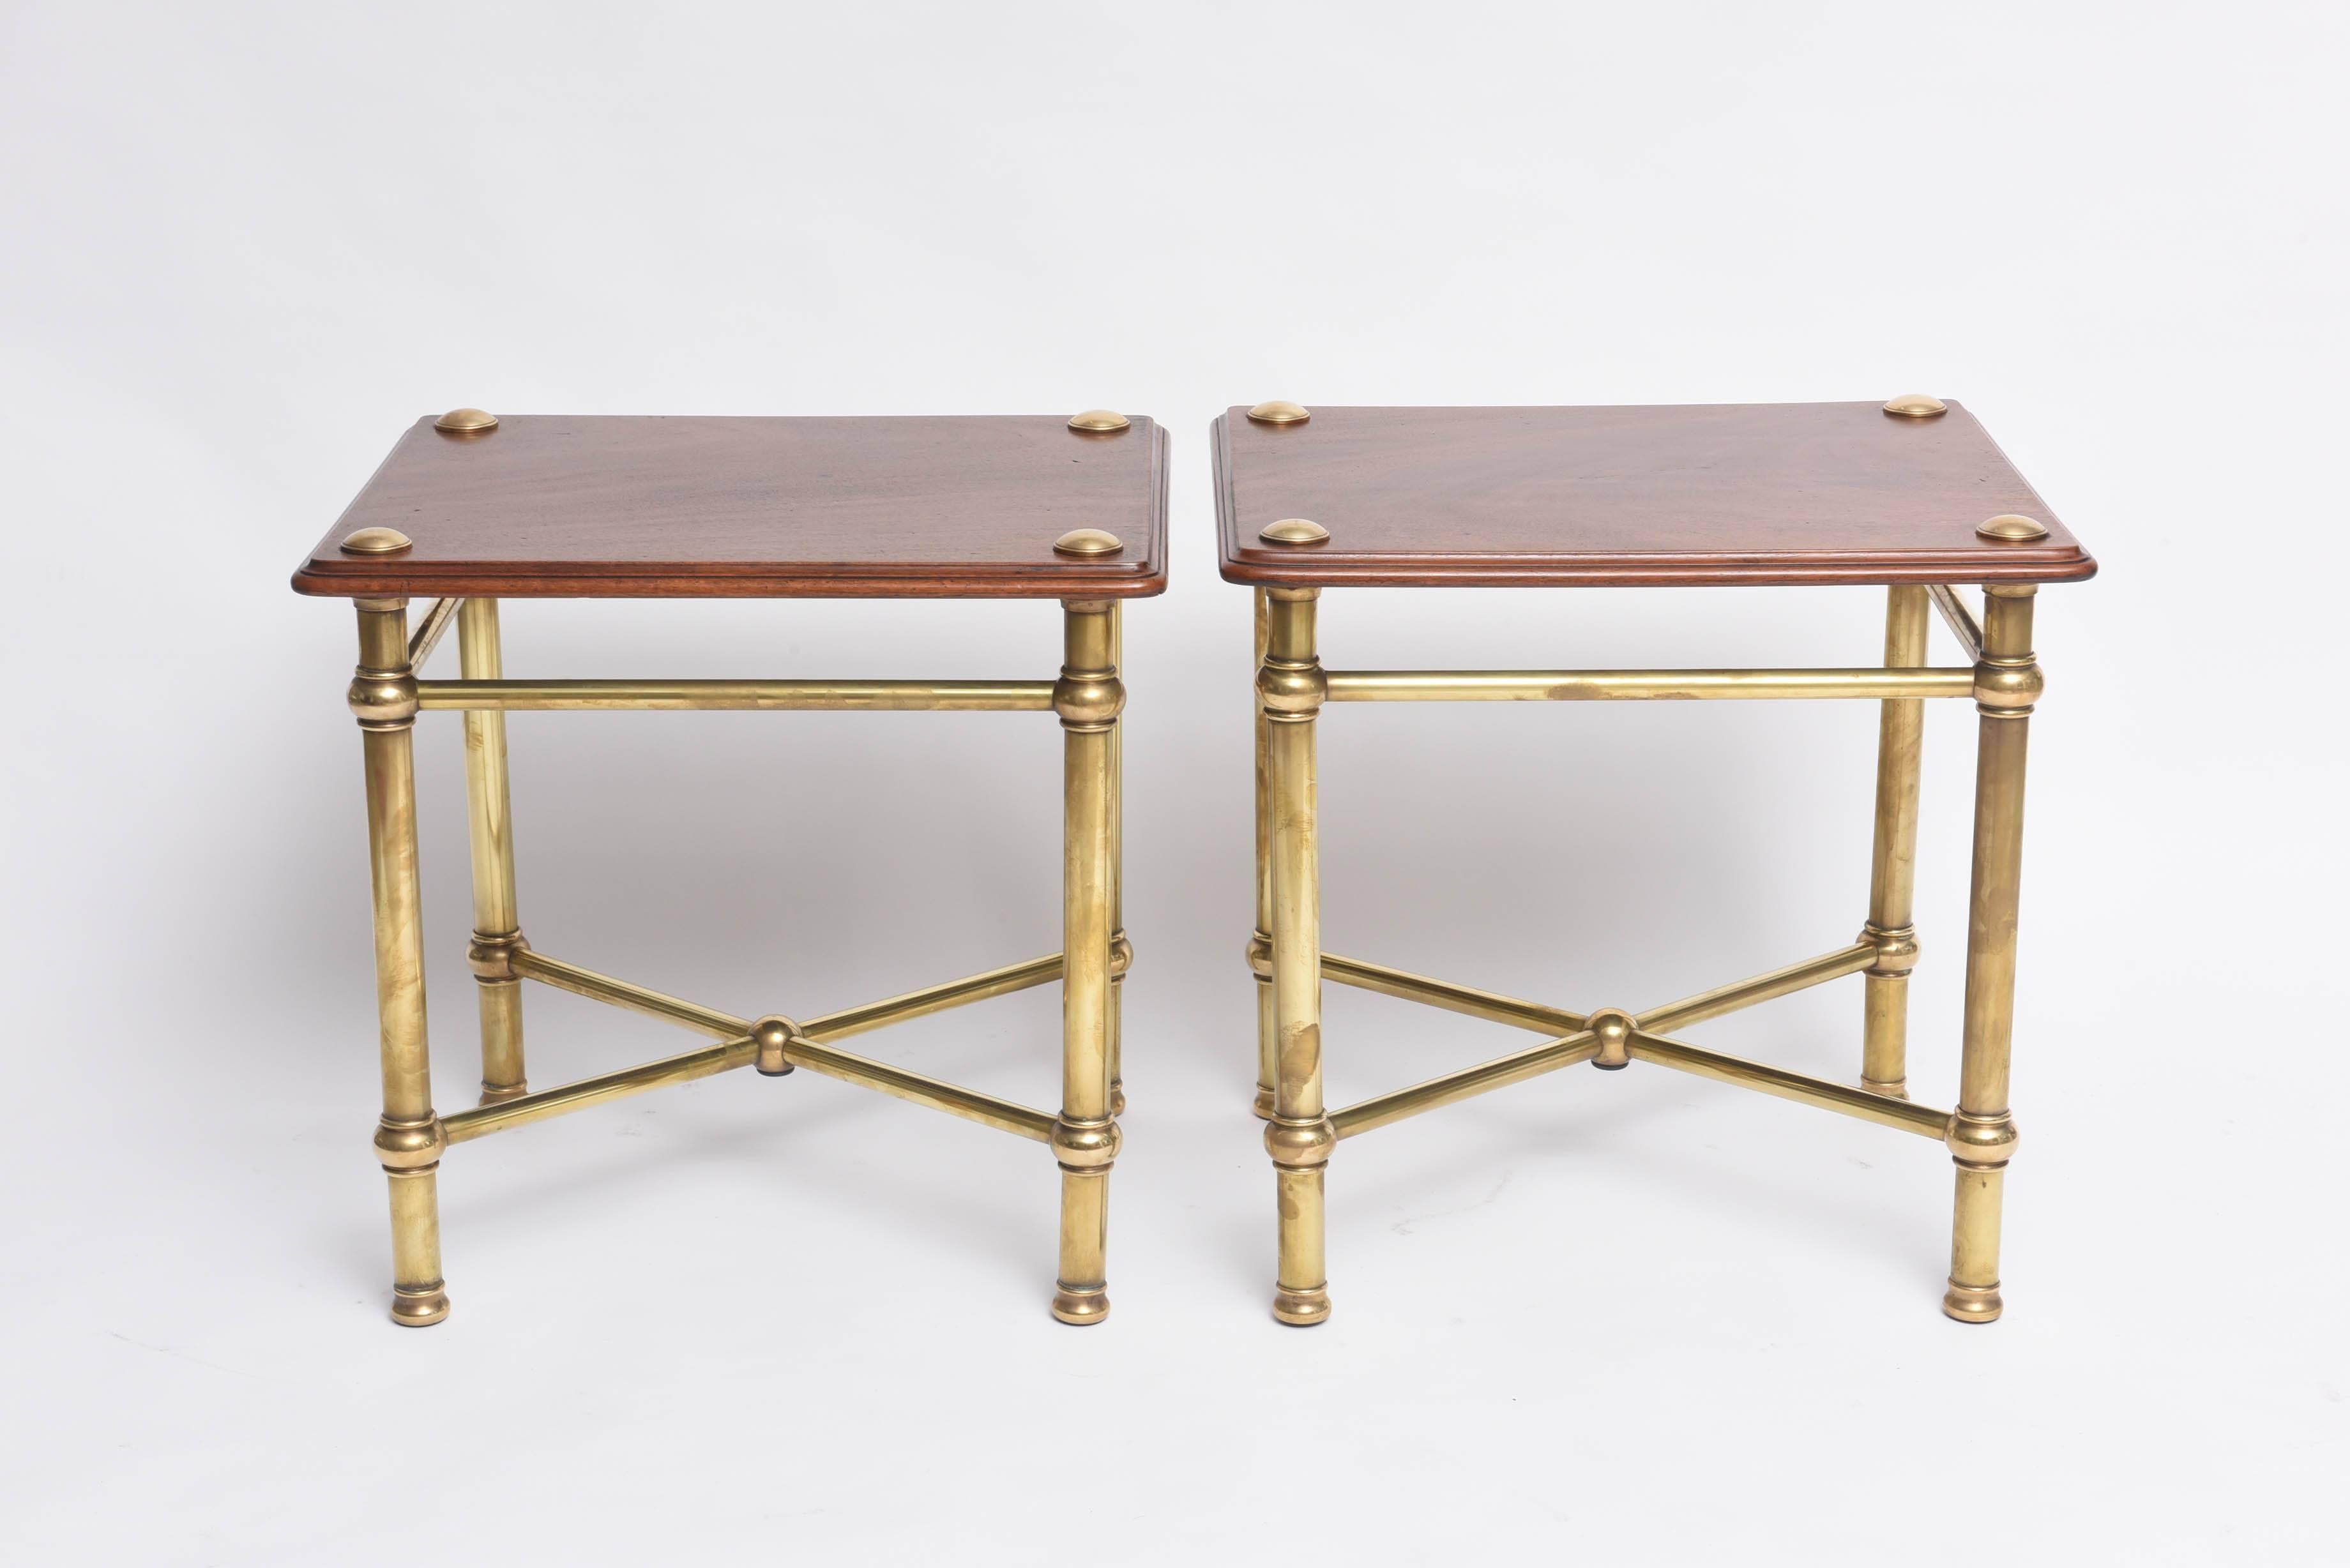 This rare pair of side tables were purchased in London and make for the ideal sized side tables. The have a great look with their tubular framed legs and cross-stretchers. The wooden tops are mahogany which has mellowed to an incredible